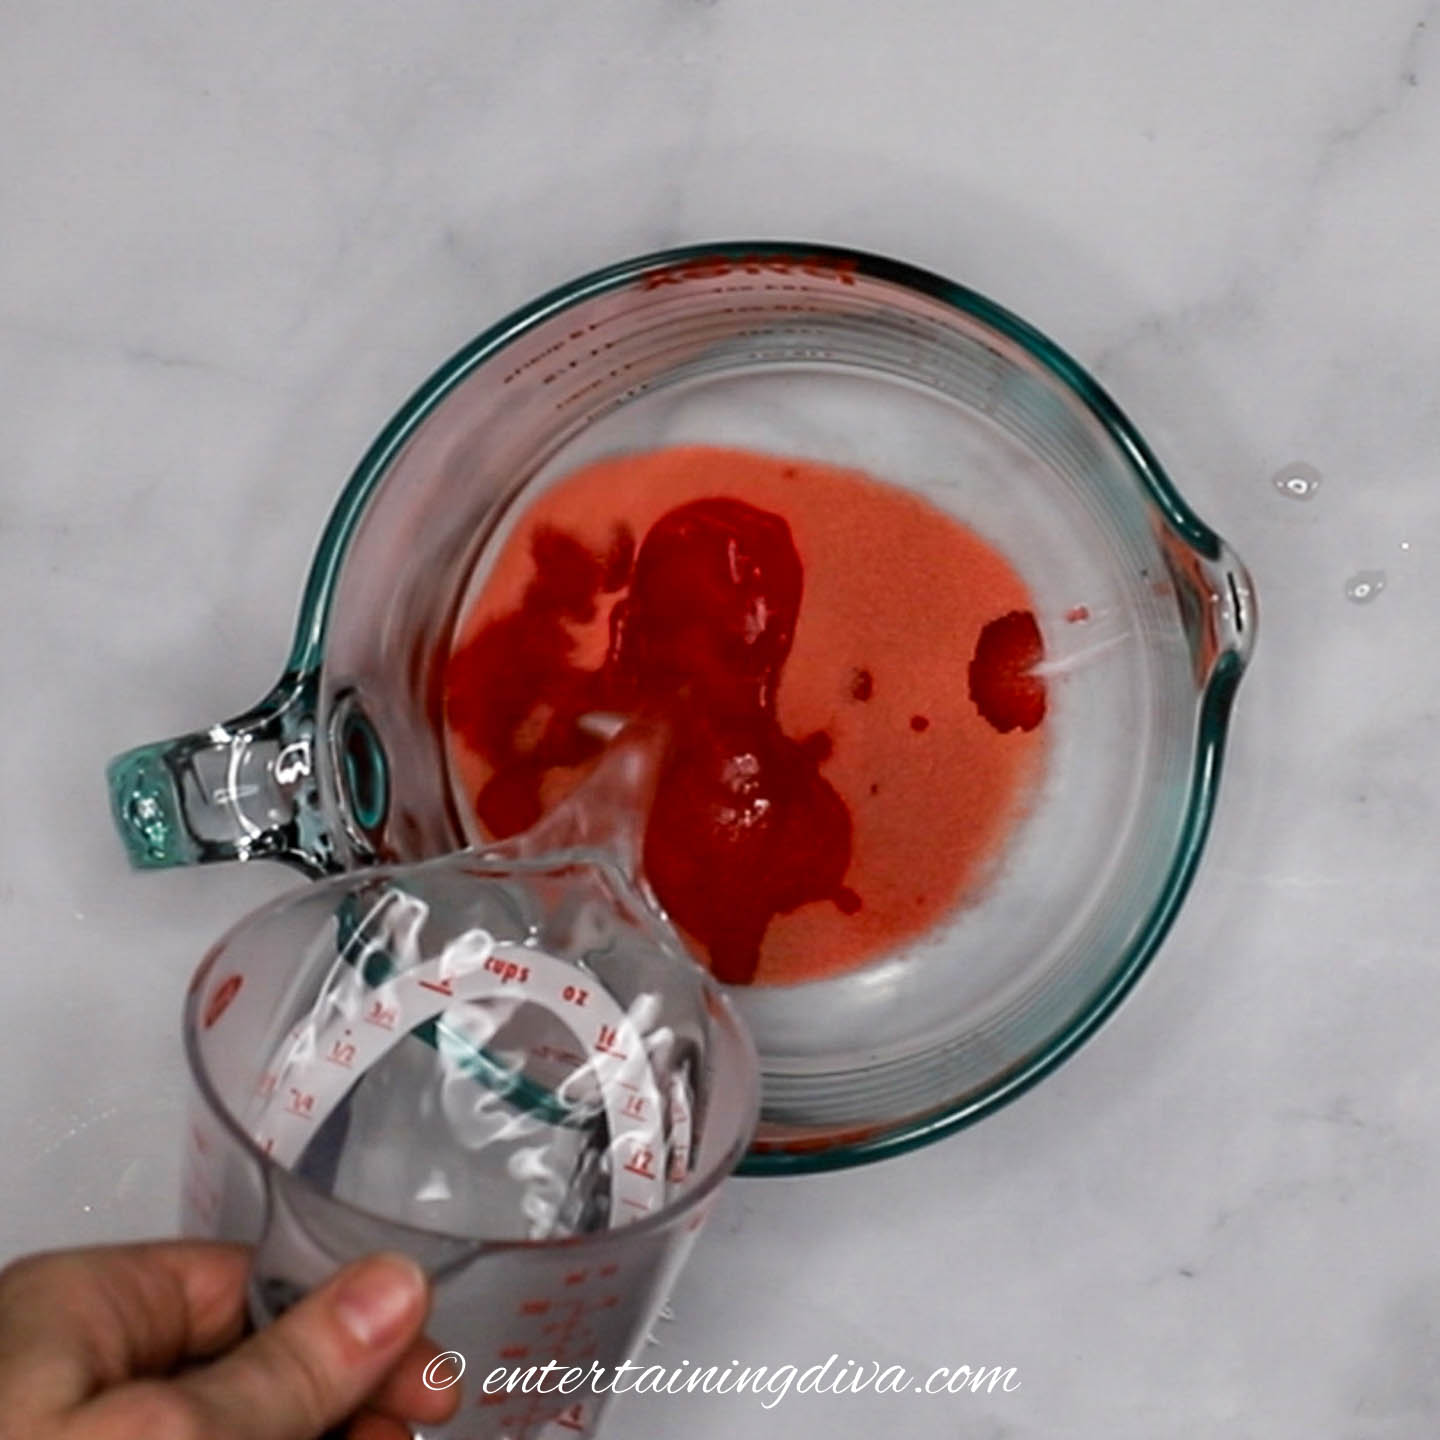 Hot water being poured into red jello crystals in a bowl